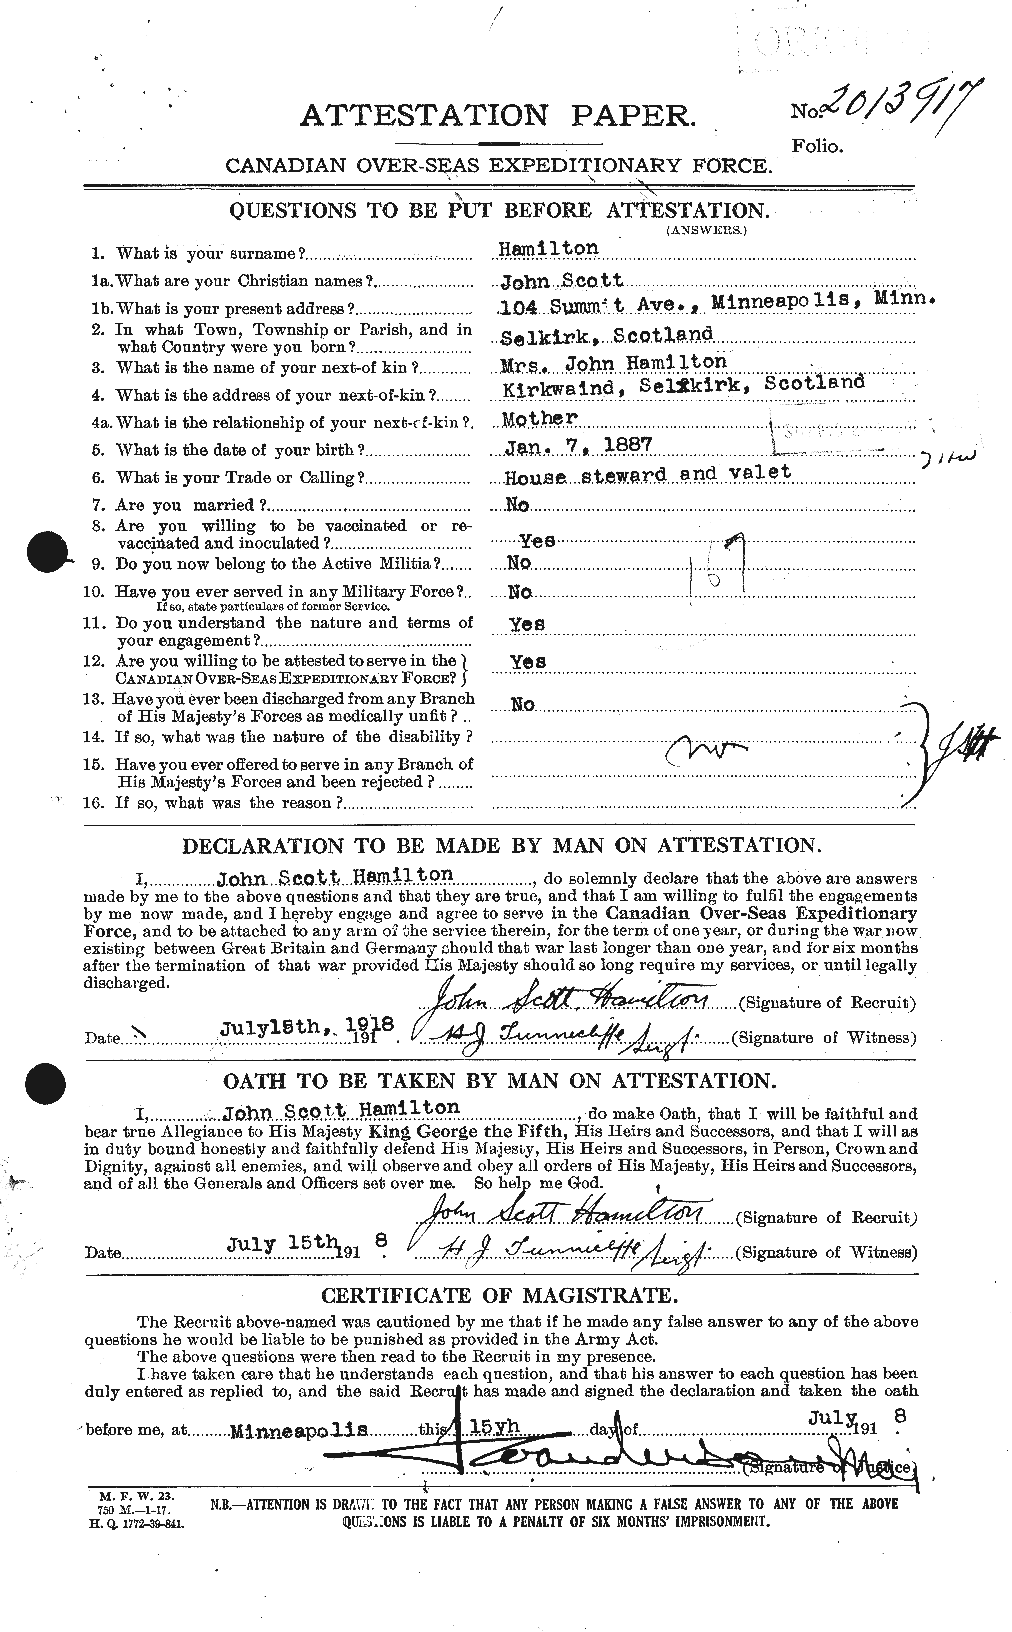 Personnel Records of the First World War - CEF 373121a